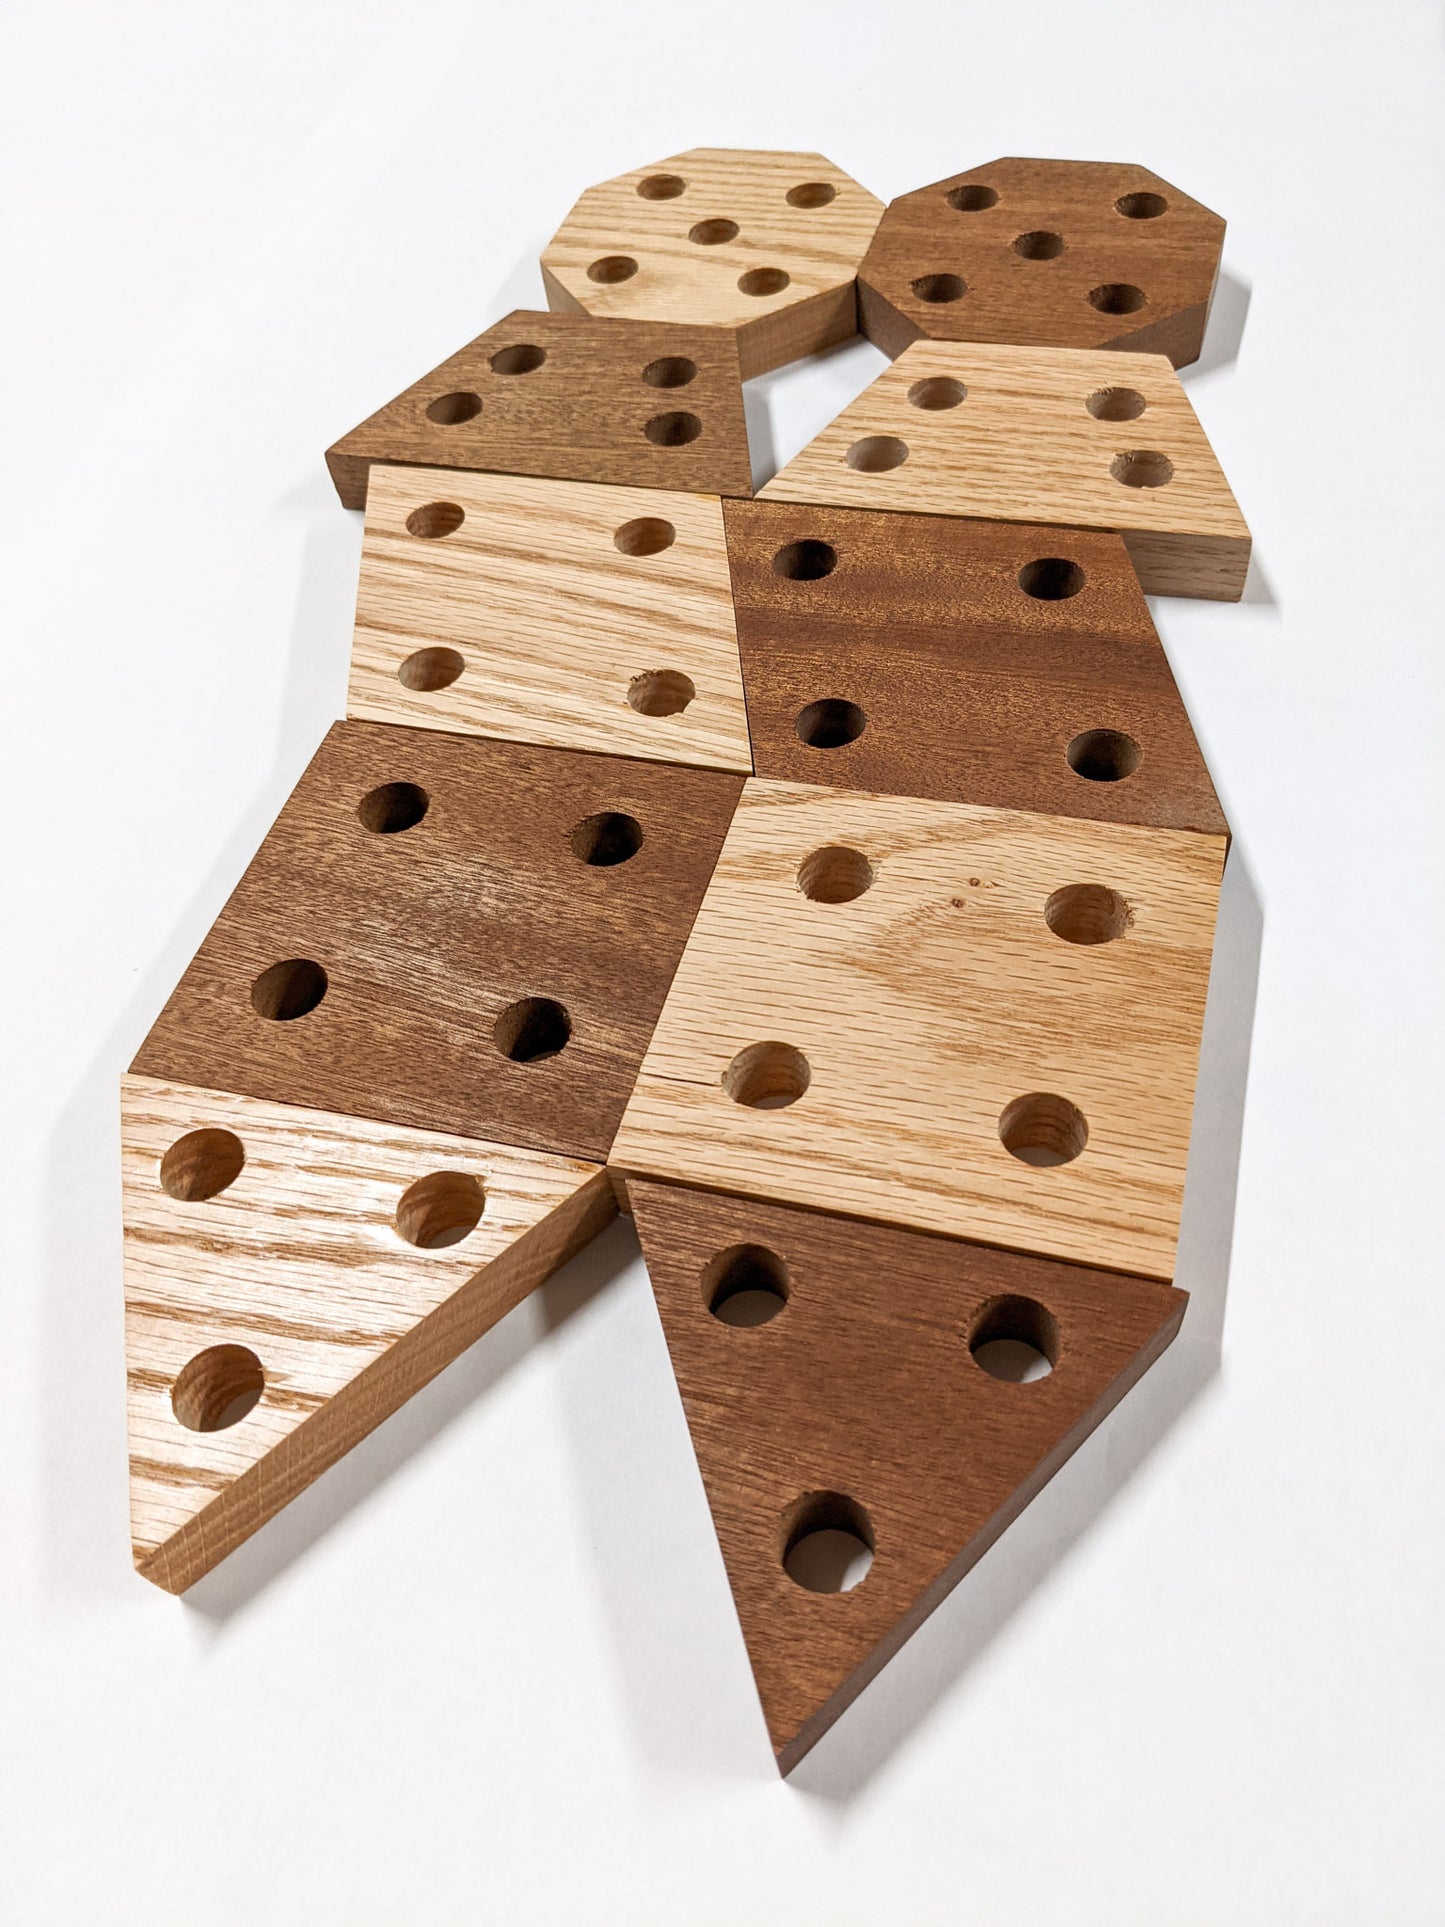 Each of the geometric propagation shelves is represented in oak and mahogany with four holes. From top to bottom, octagon, rhombus, trapezoid, square, and triangle. The triangle has three holes. 